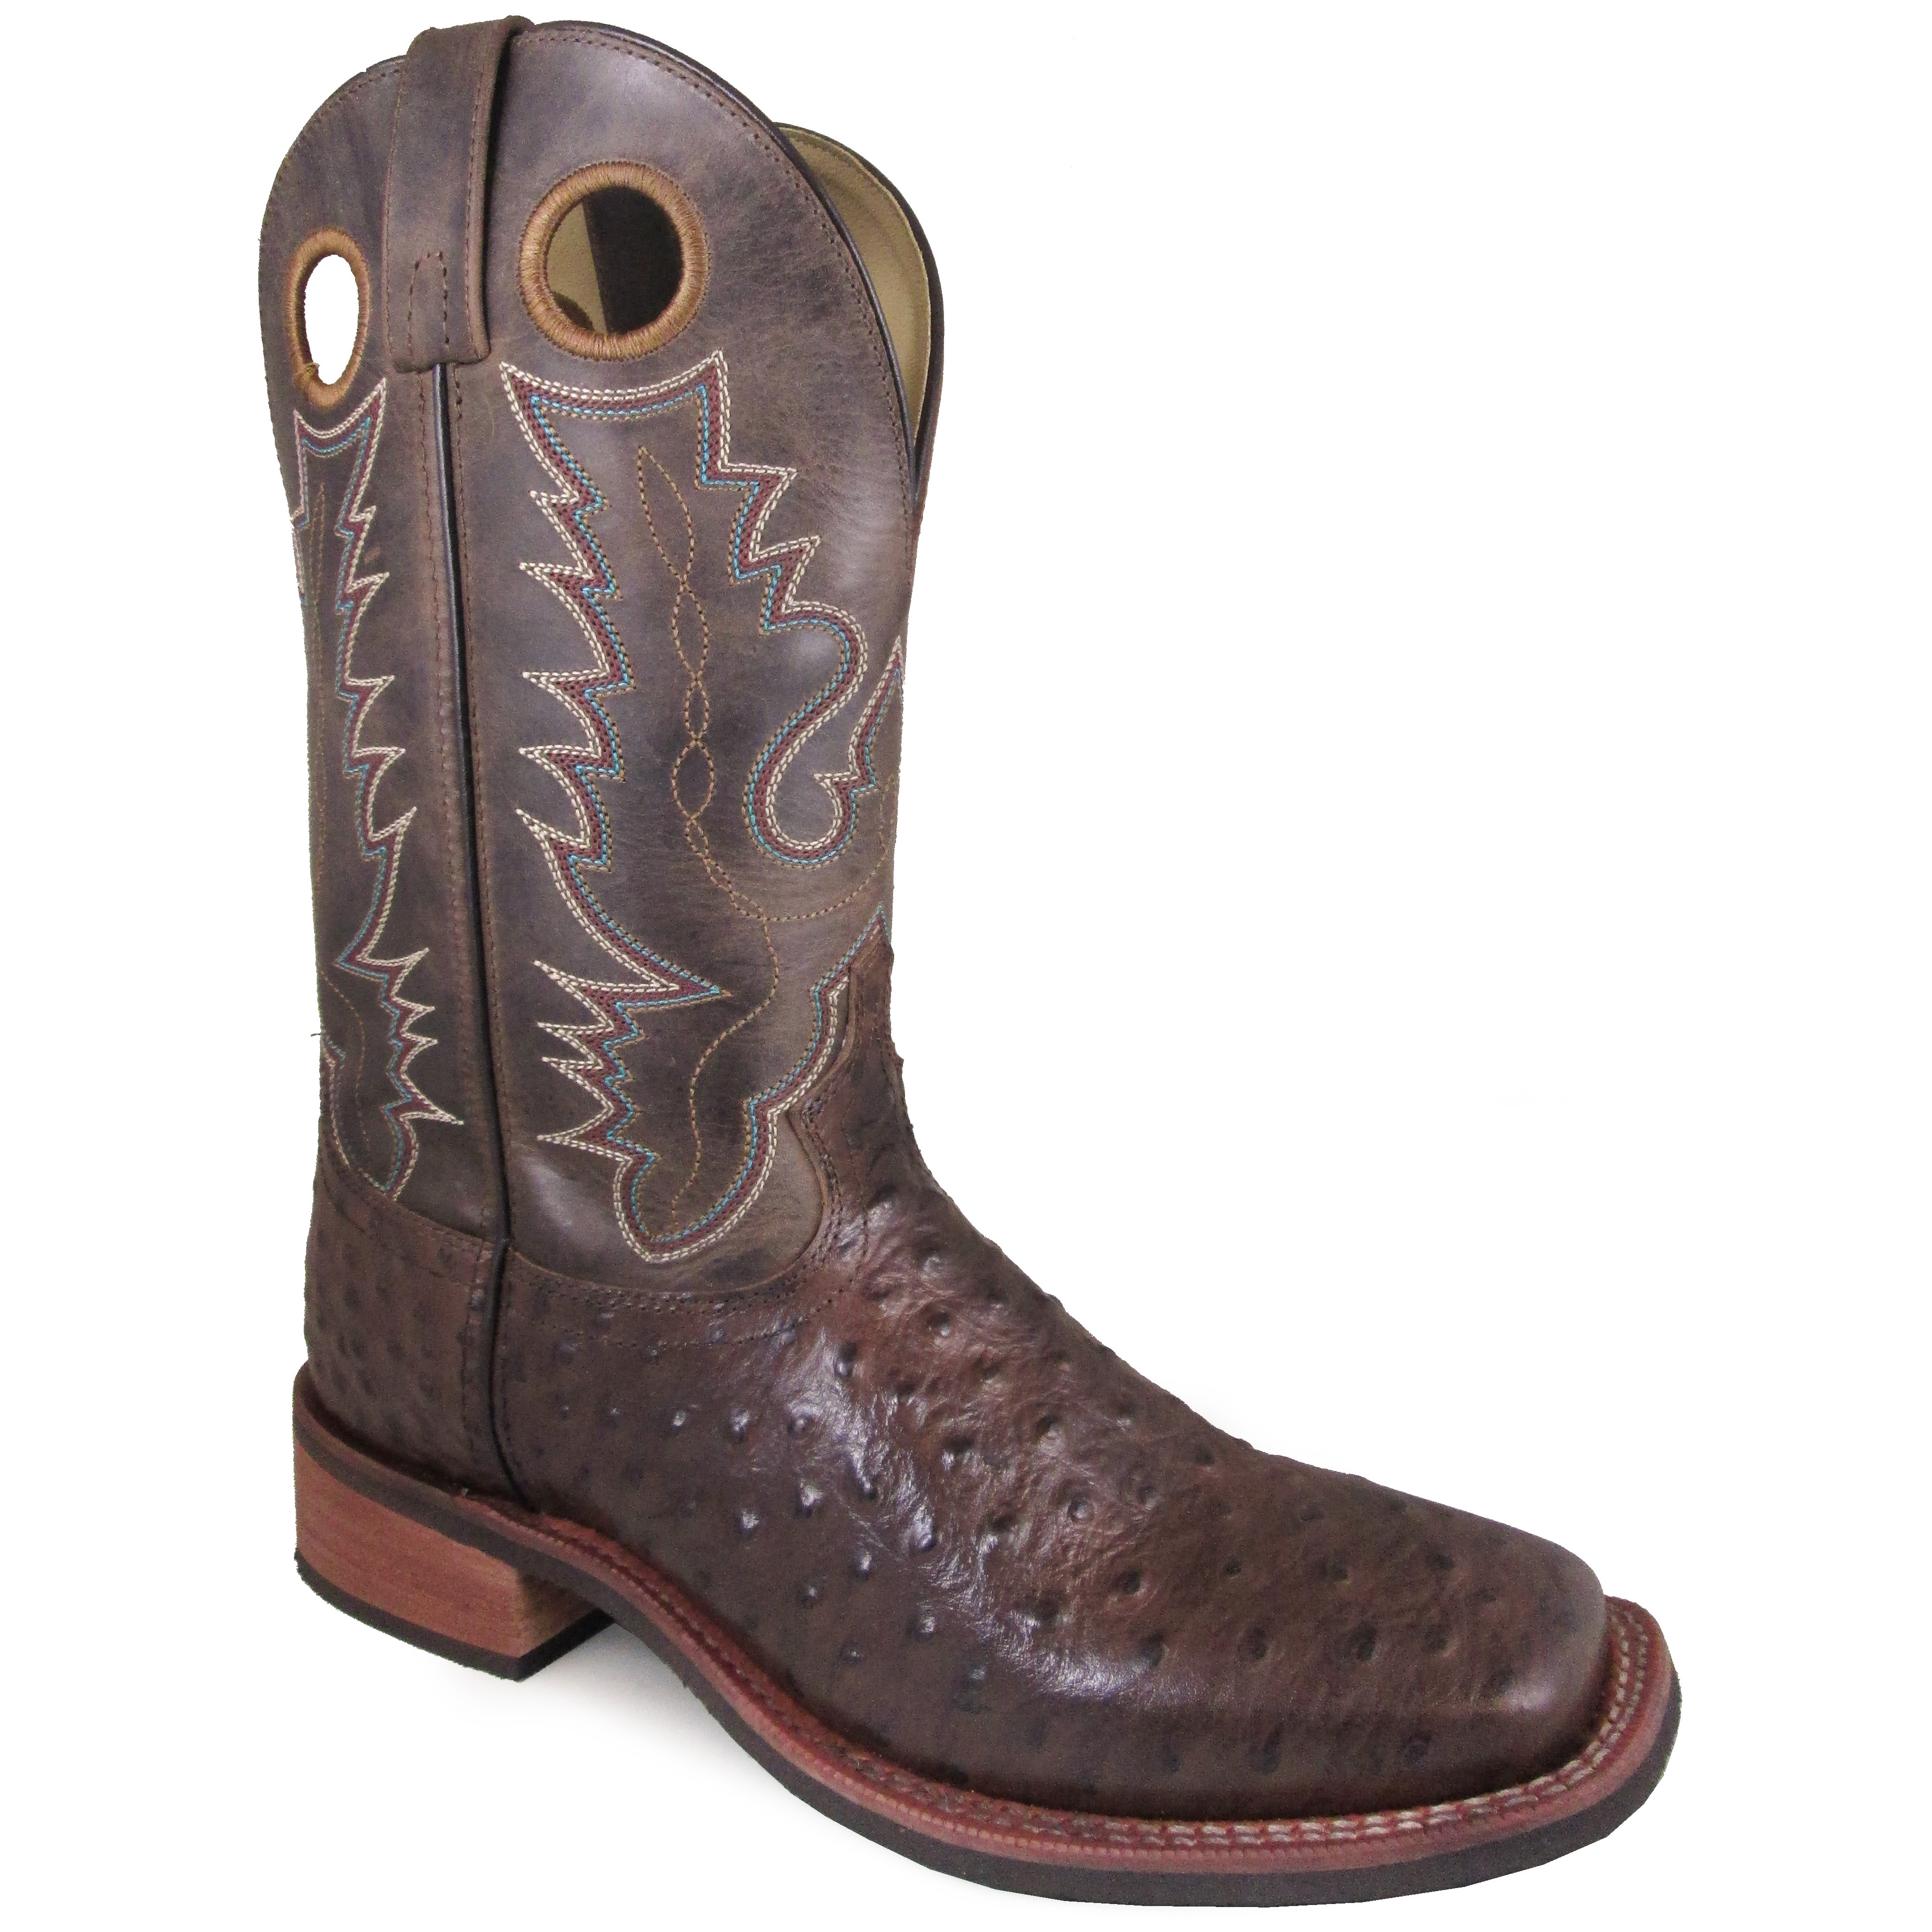 Smoky Mountain Boots Men's Danville 11" Tobacco/Brown Crackle Leather Cowboy Boot